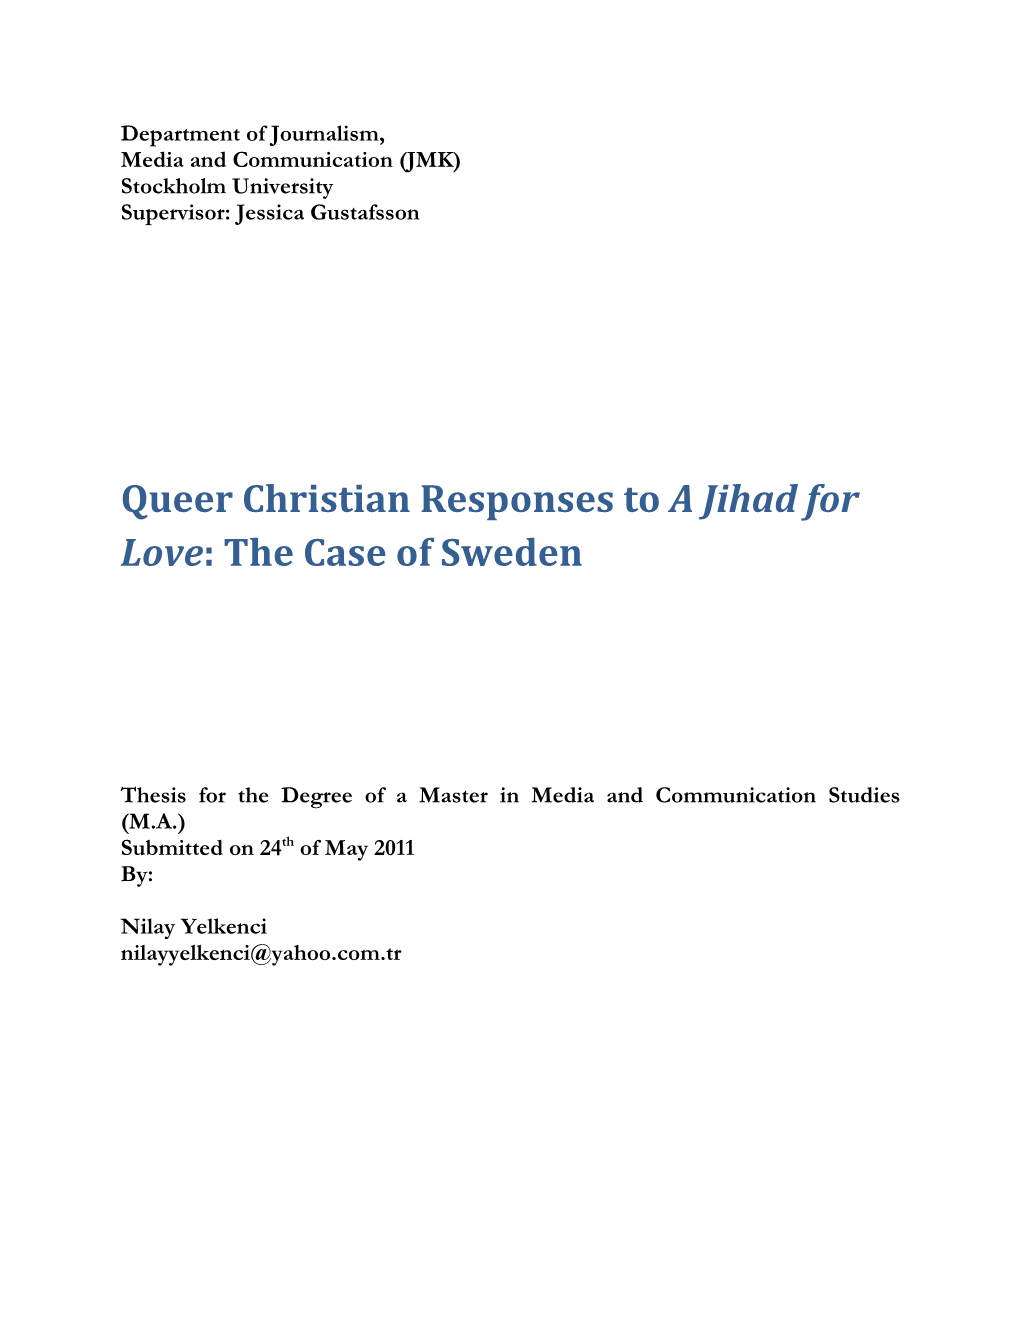 Queer Christian Responses to a Jihad for Love: the Case of Sweden